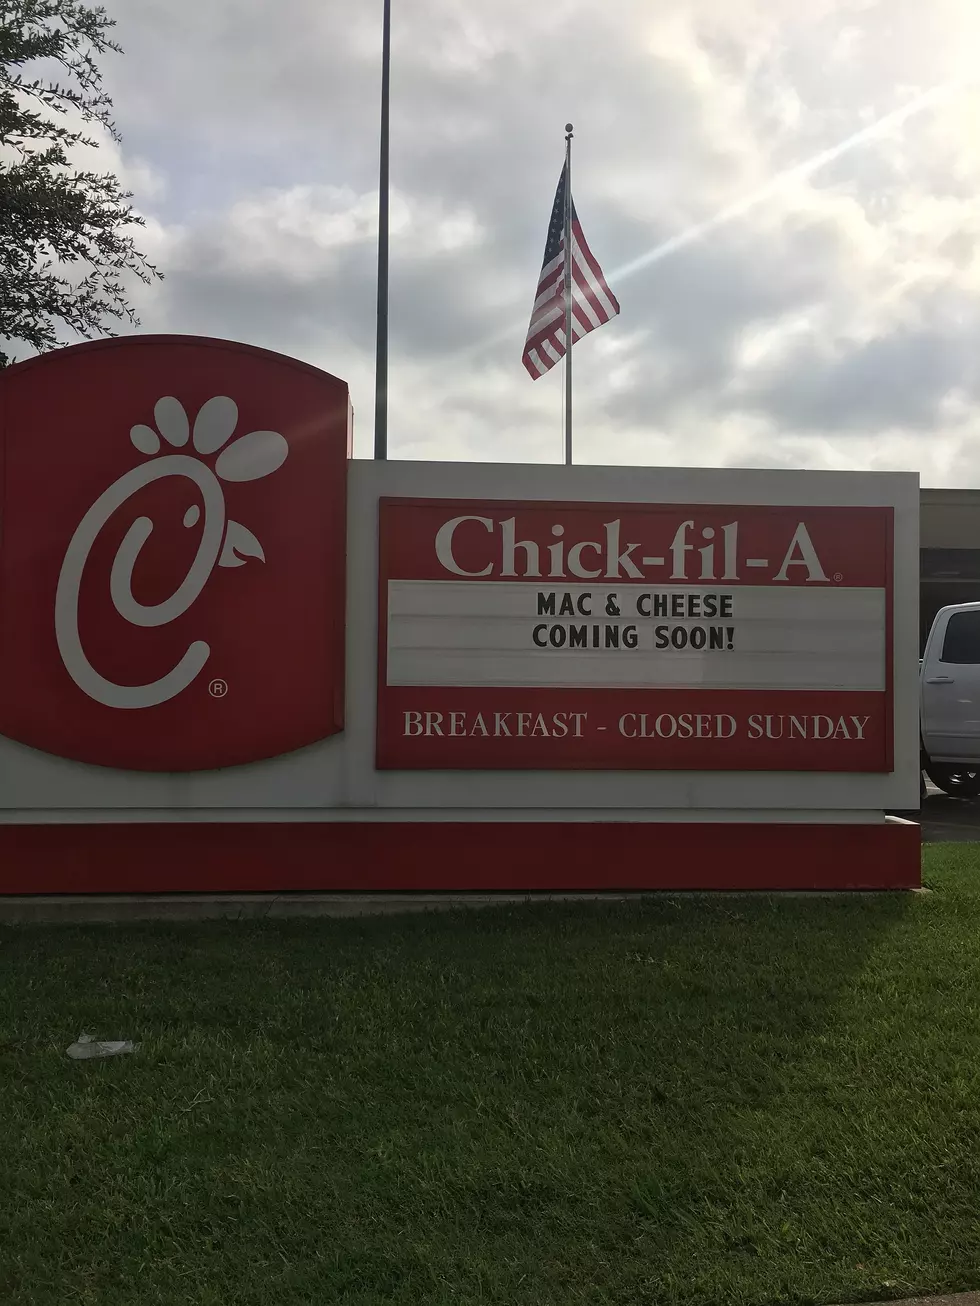 Chick-Fil-A Lufkin Is Adding A New Item To Their Menu!